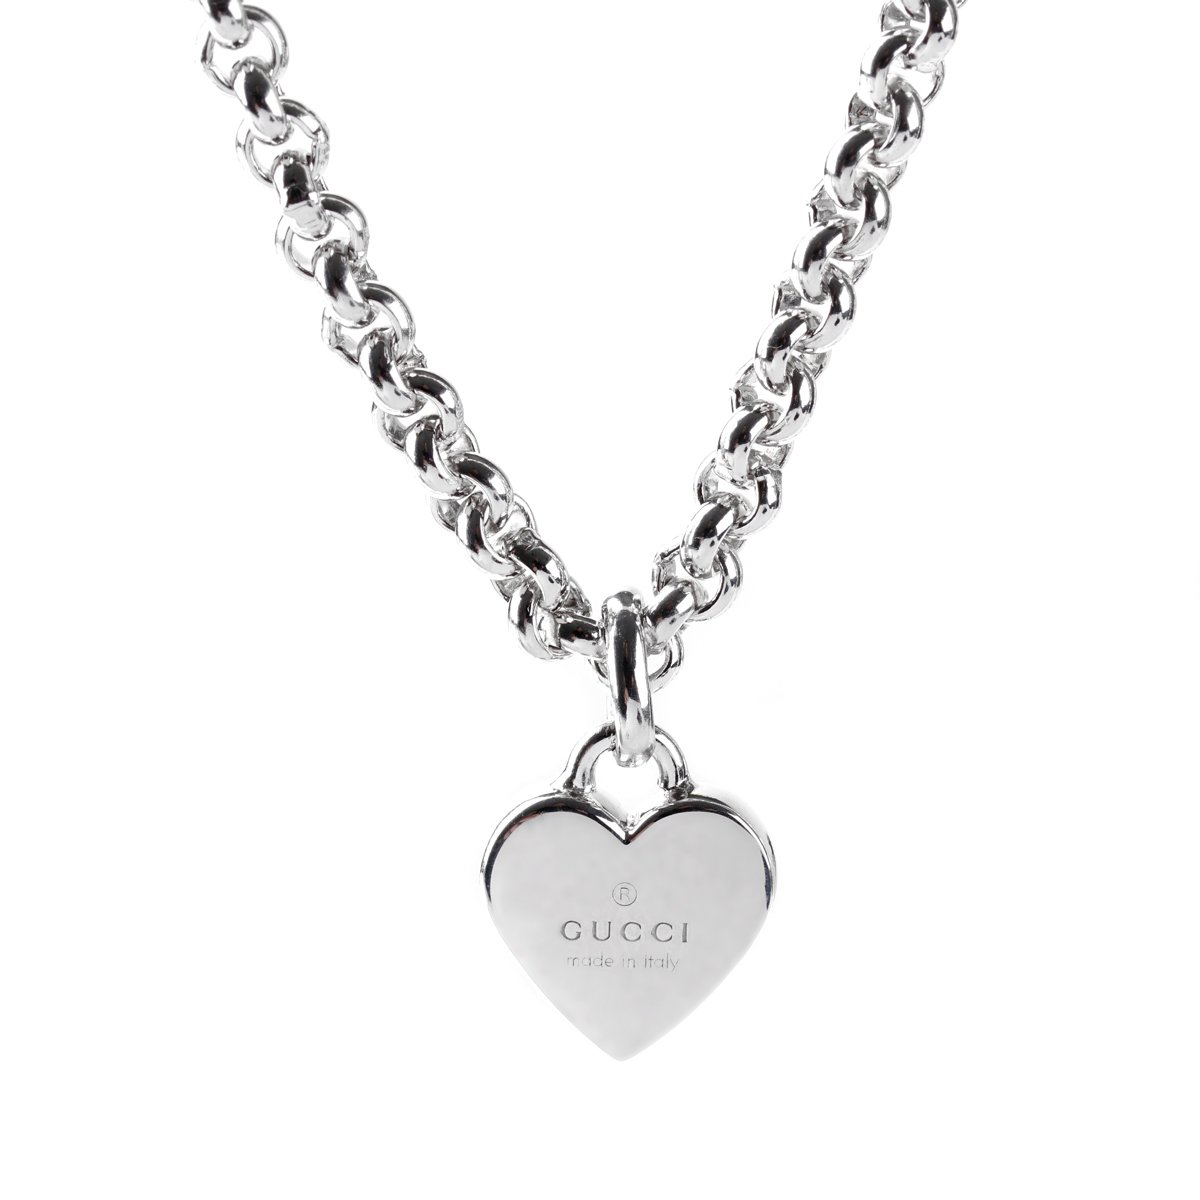 Gucci Chain Link Heart Silver Necklace